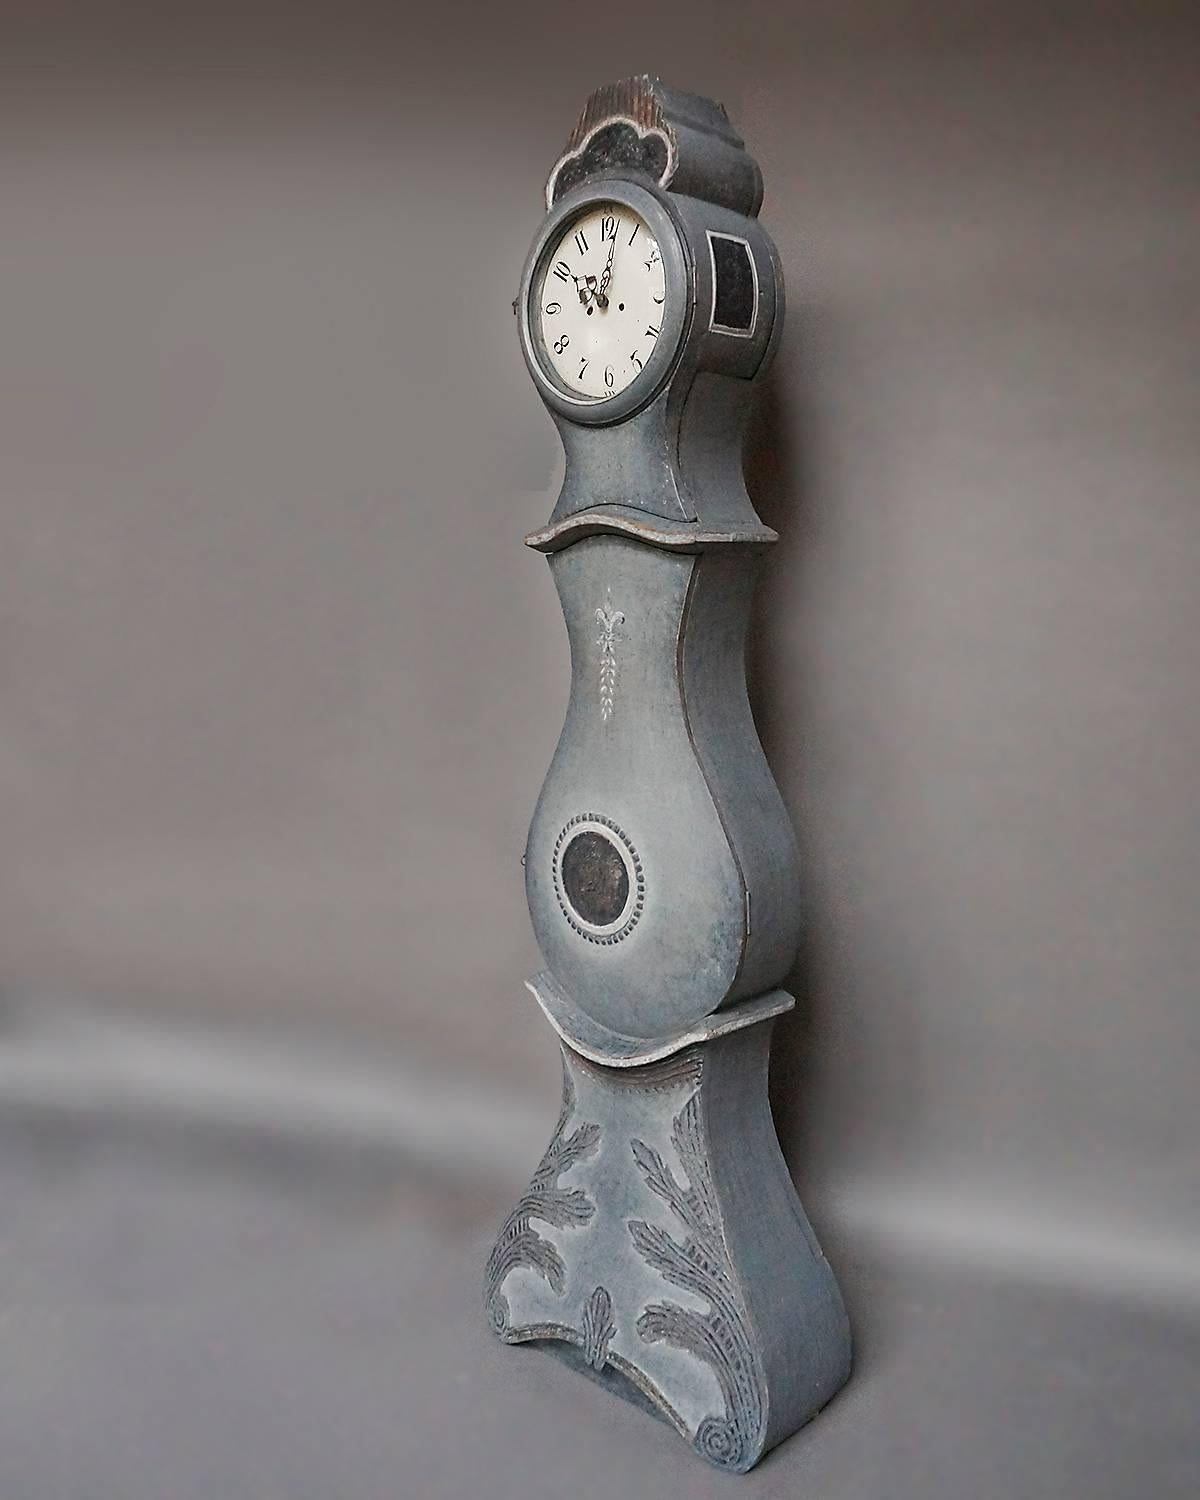 Carved Tall Case Clock by Sven Nilsson Morin